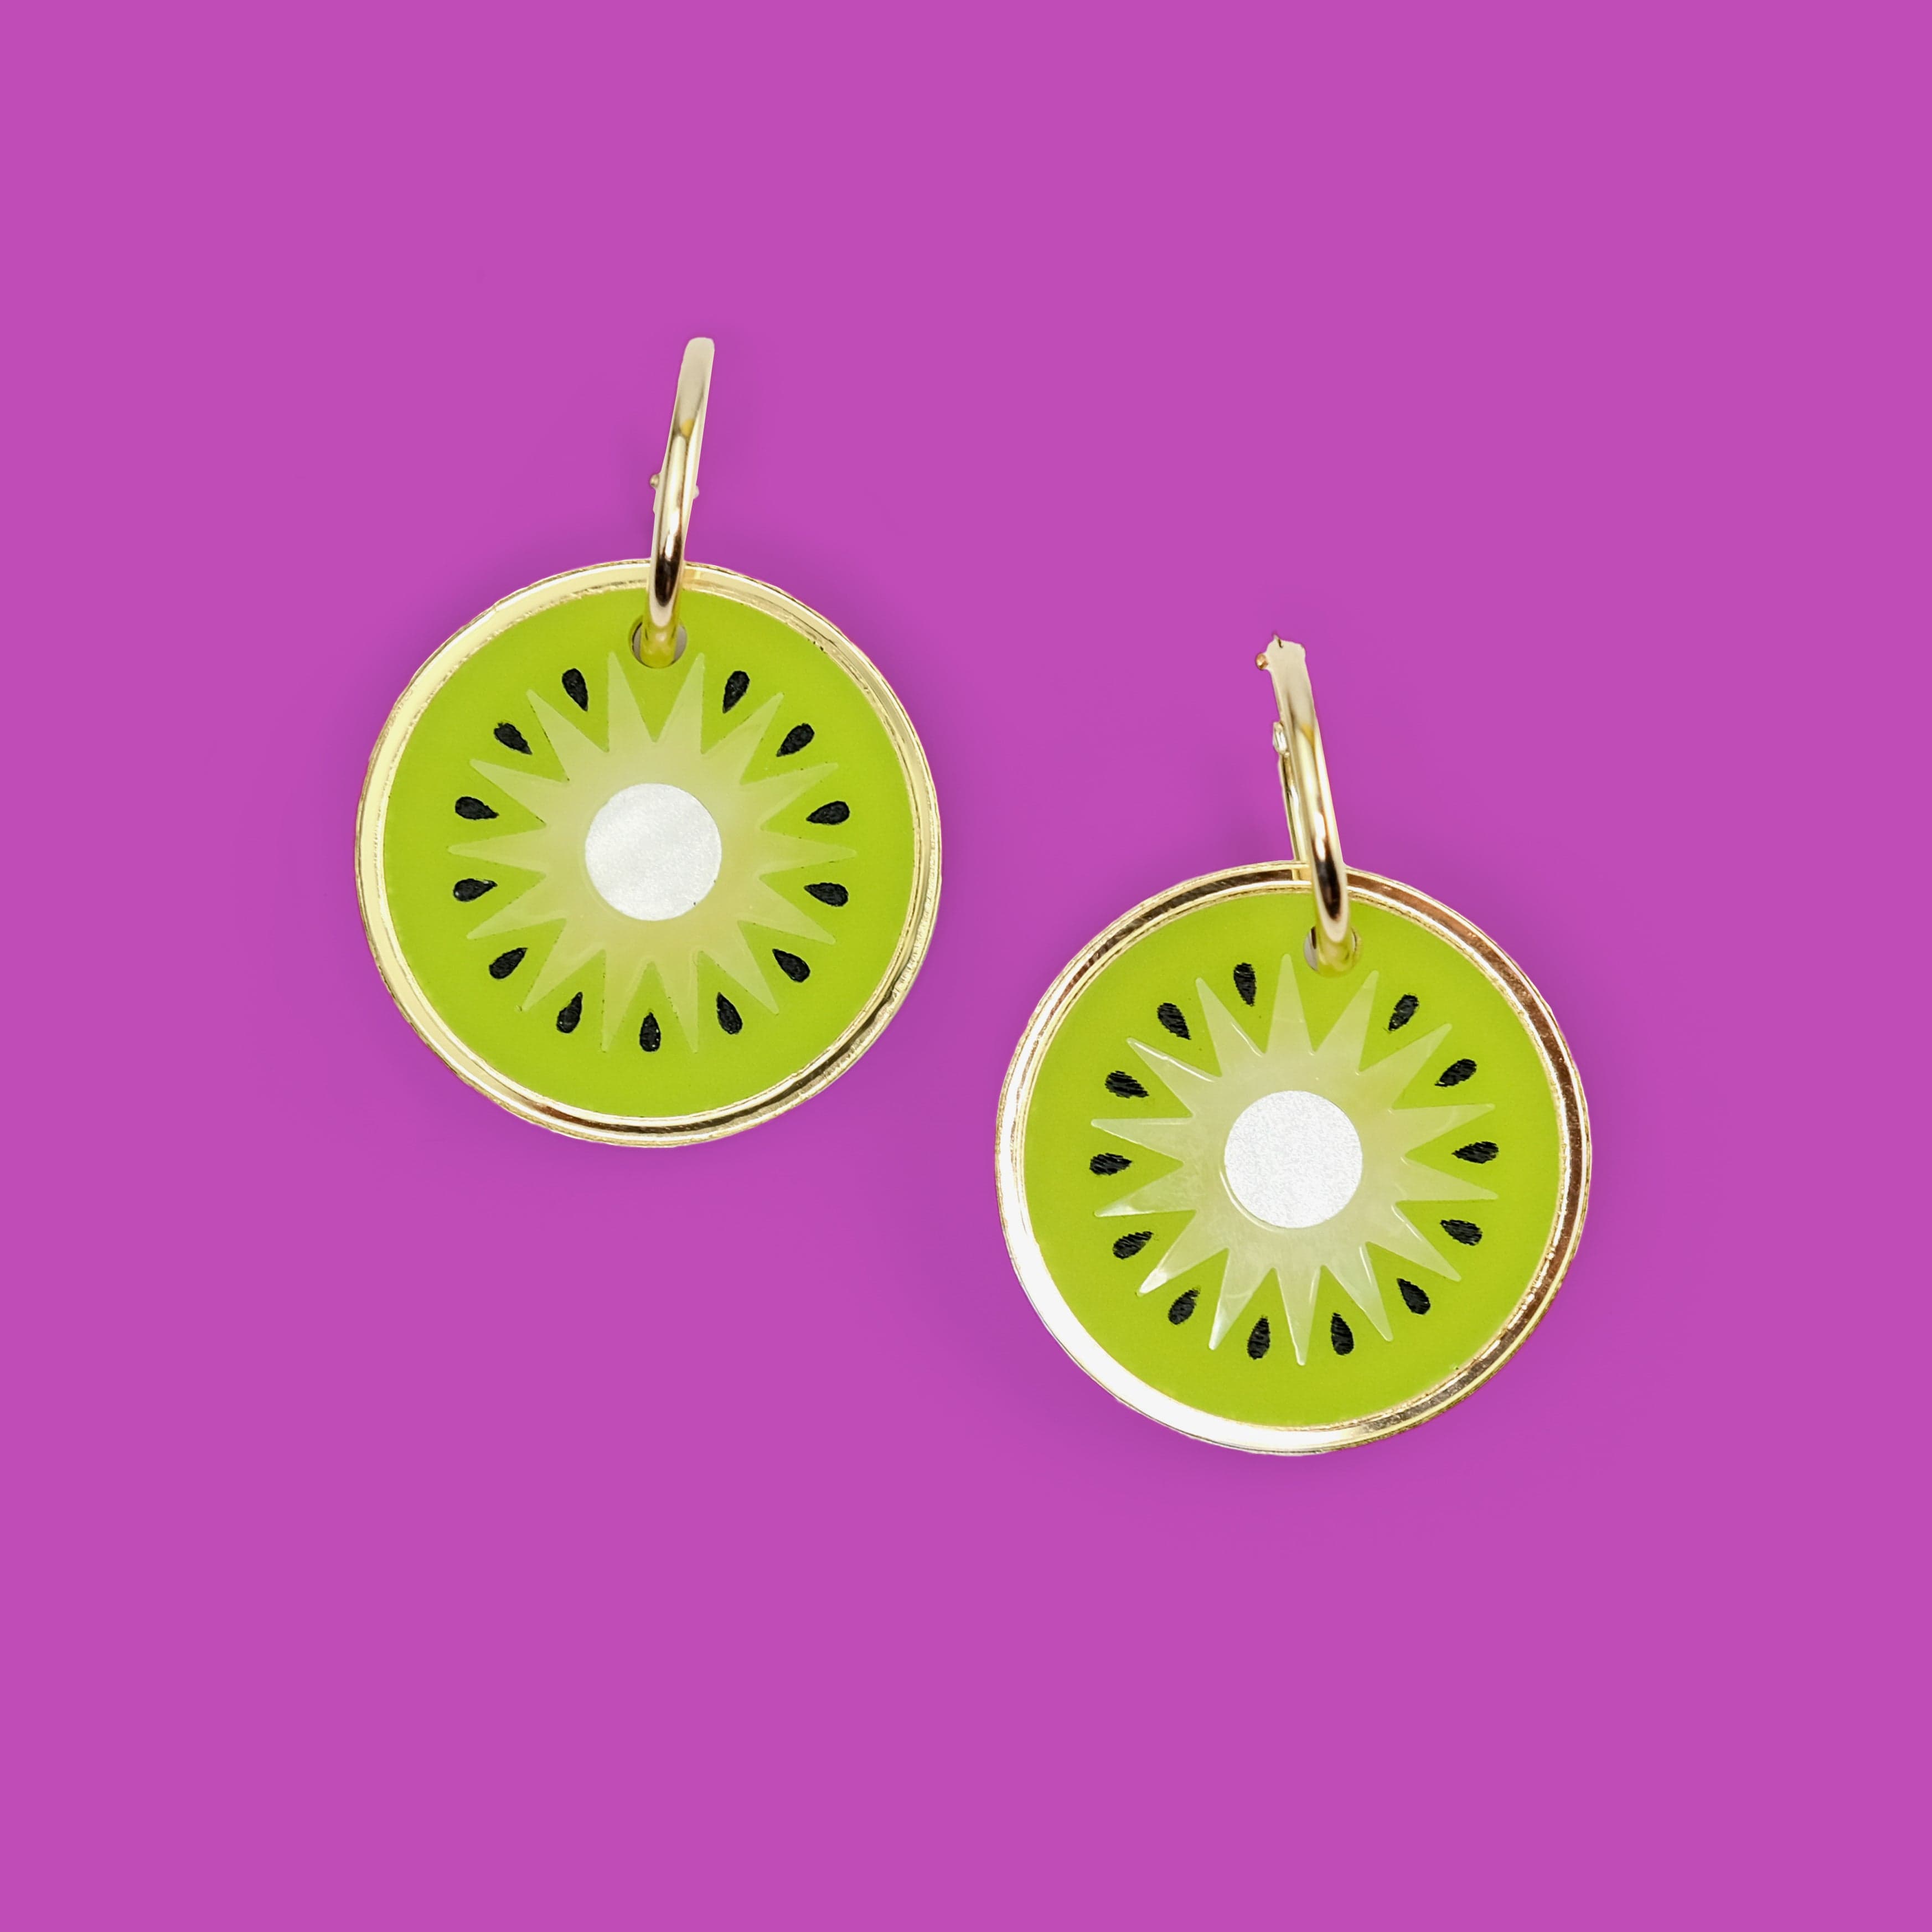 Statement Kiwi earrings with gold-filled hoops lightweight and hand-made in NYC